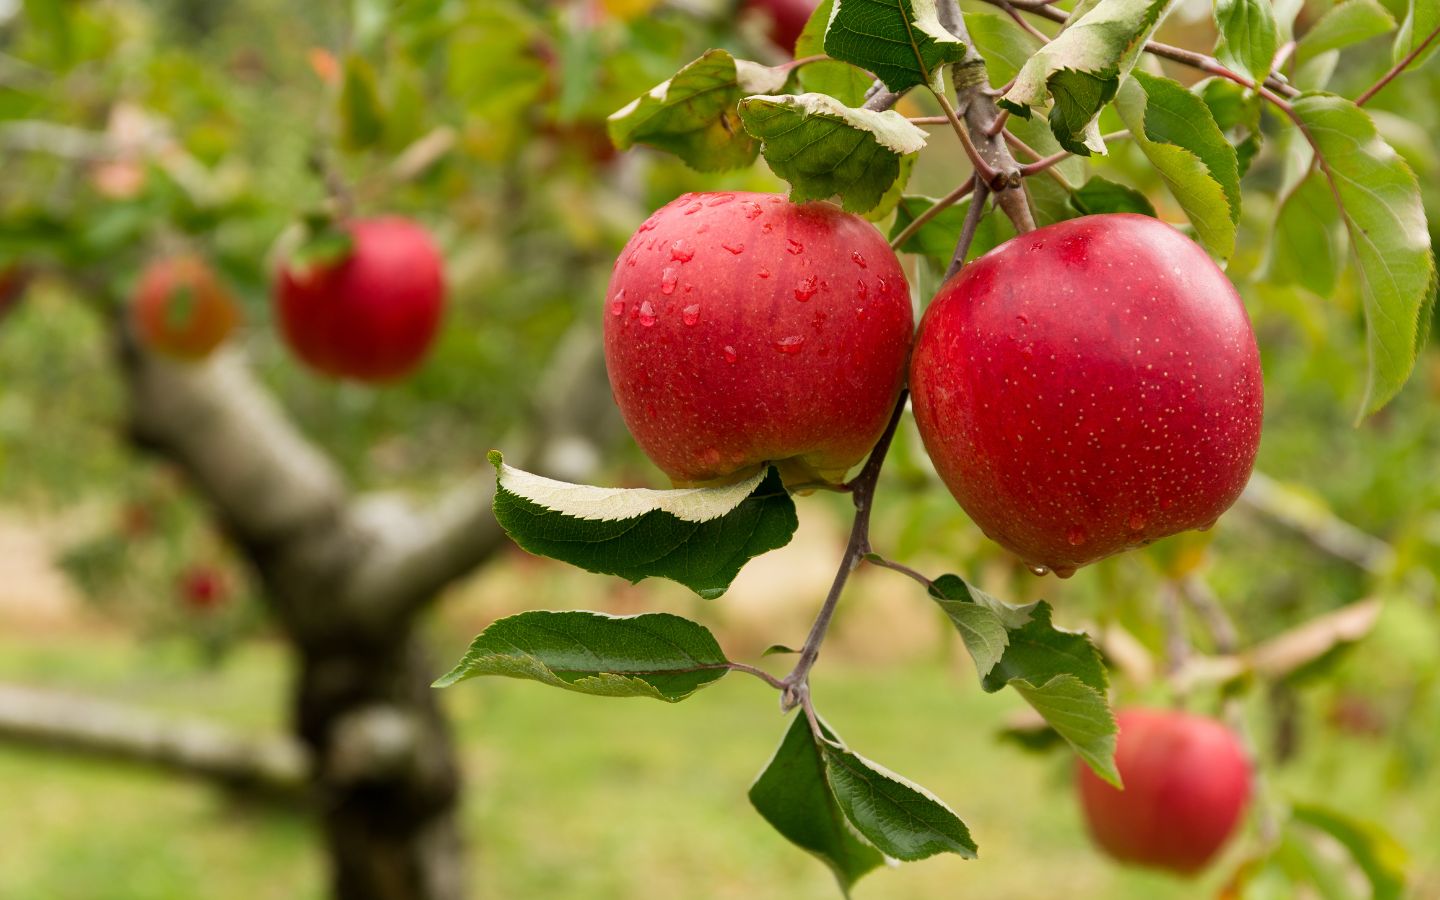 Ripe red apples in an apple orchard